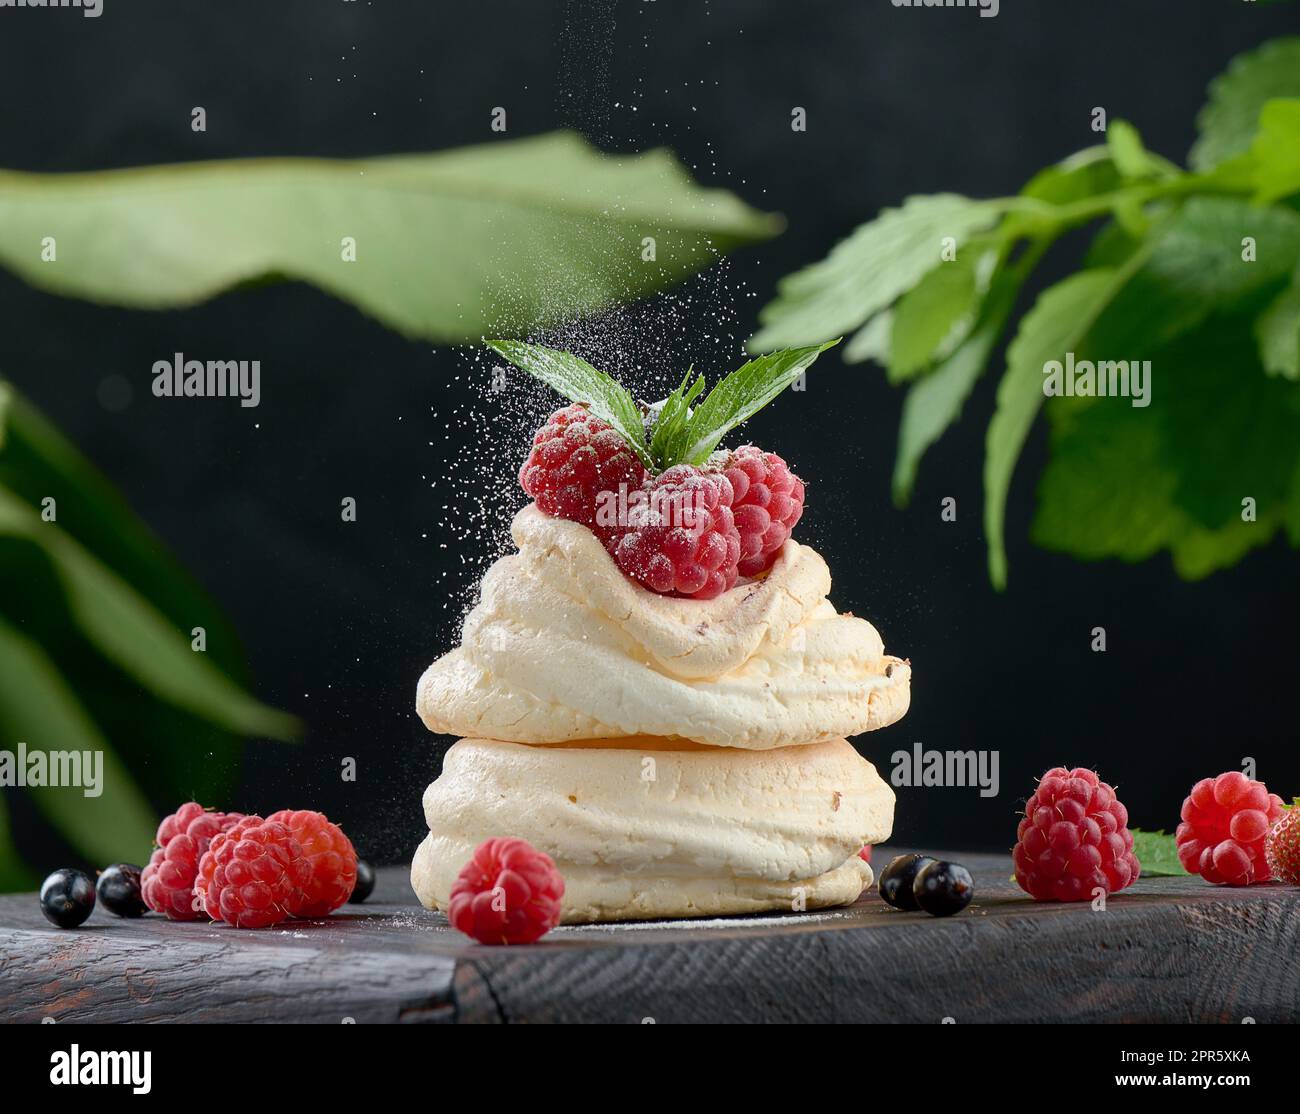 Baked cake made from whipped chicken protein and cream, decorated with fresh berries Stock Photo